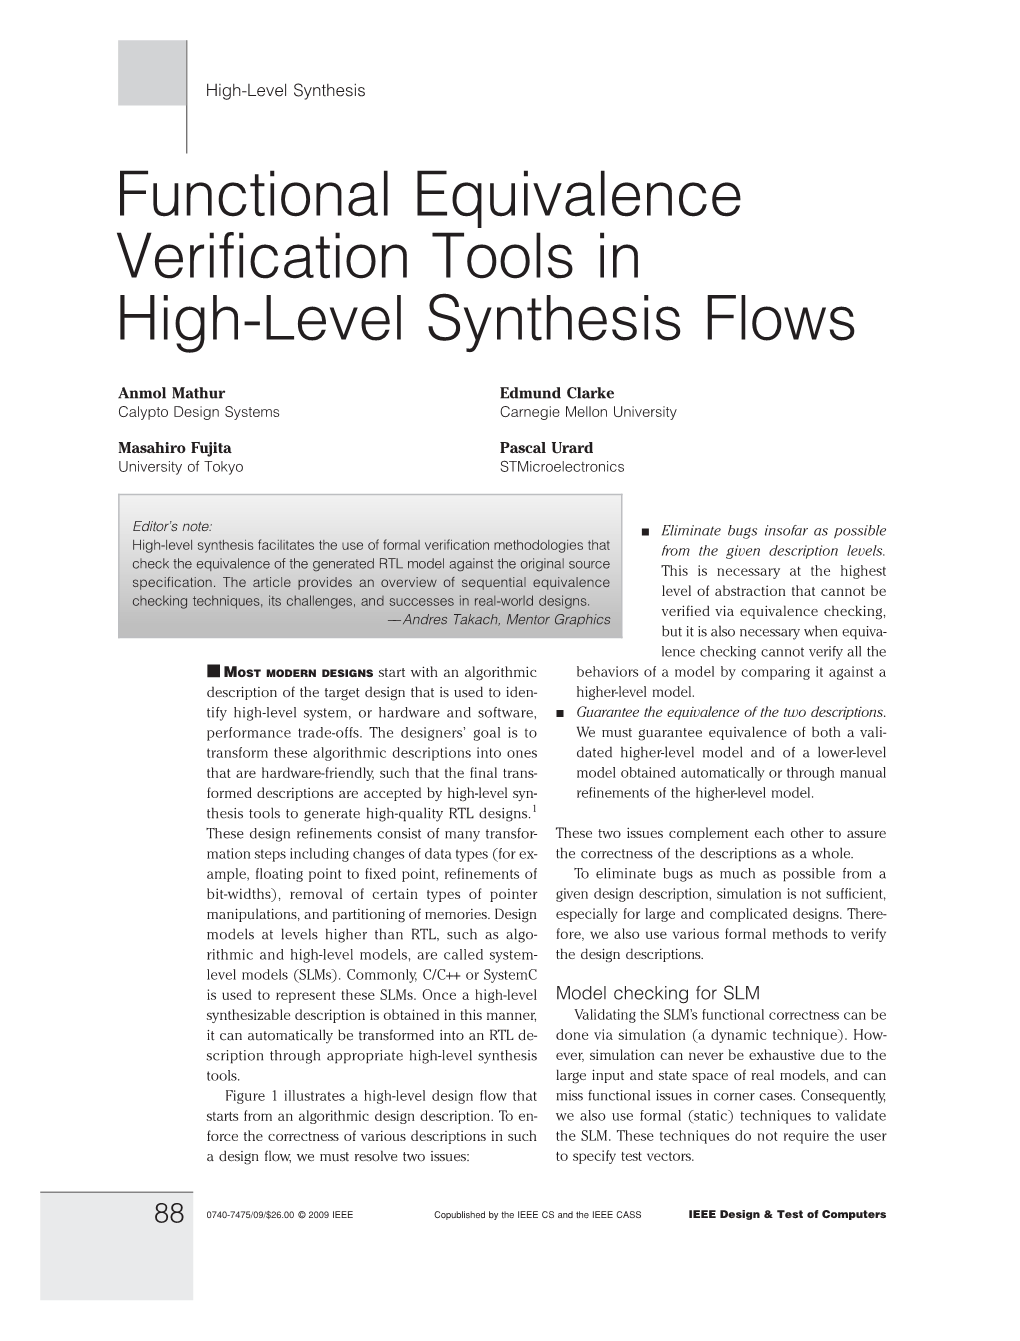 Functional Equivalence Verification Tools in High-Level Synthesis Flows